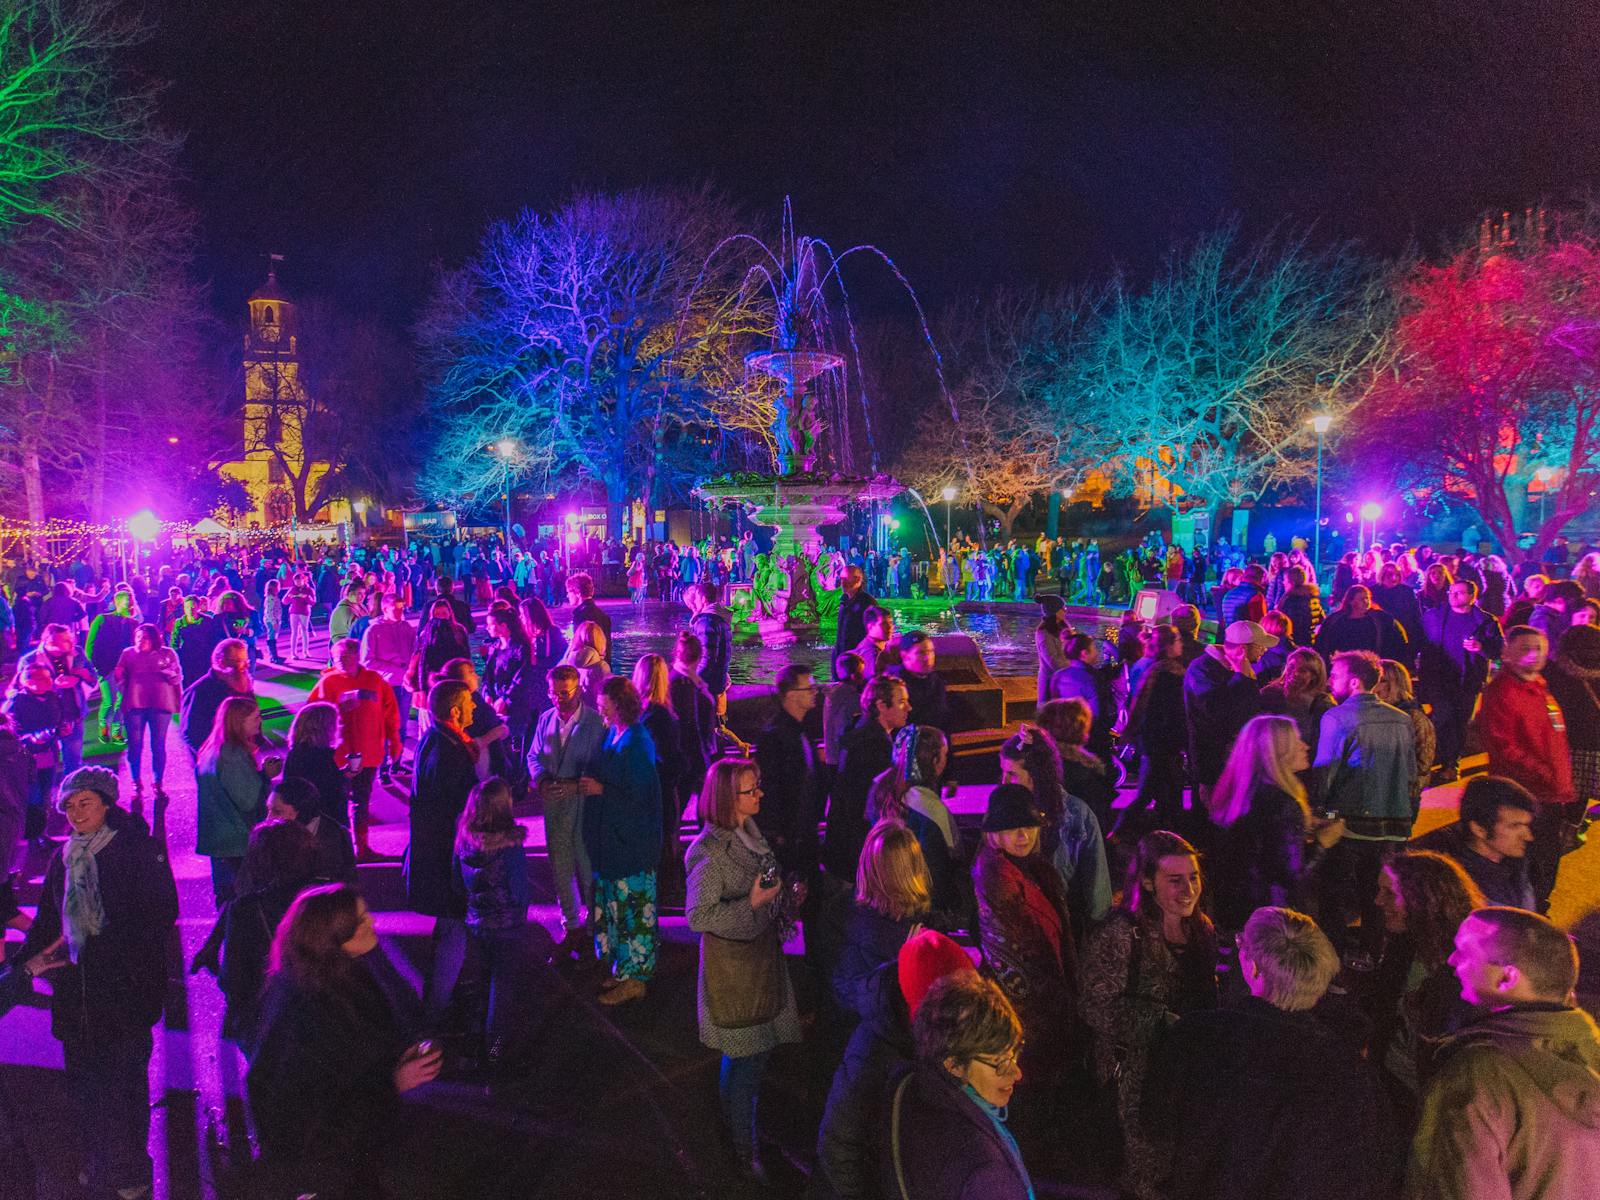 A crowd of people lit up by multicoloured lights outside at night